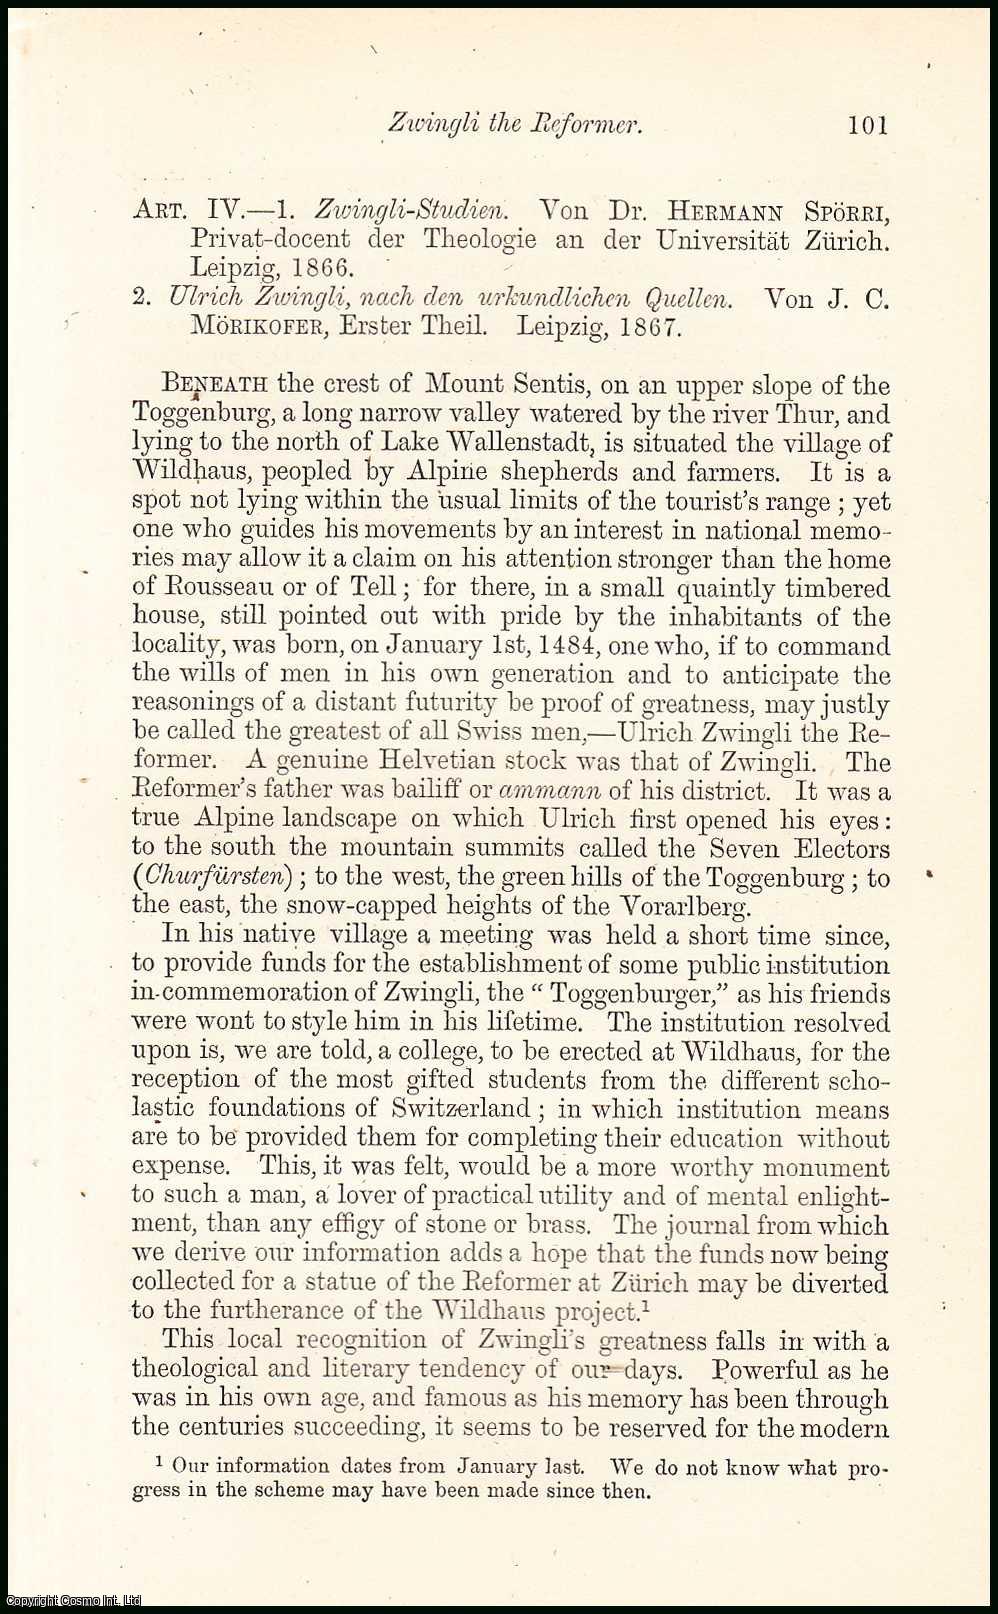 Louisa A. Merivale - Zwingli, the Reformer. An uncommon original article from the North British Review, 1868.